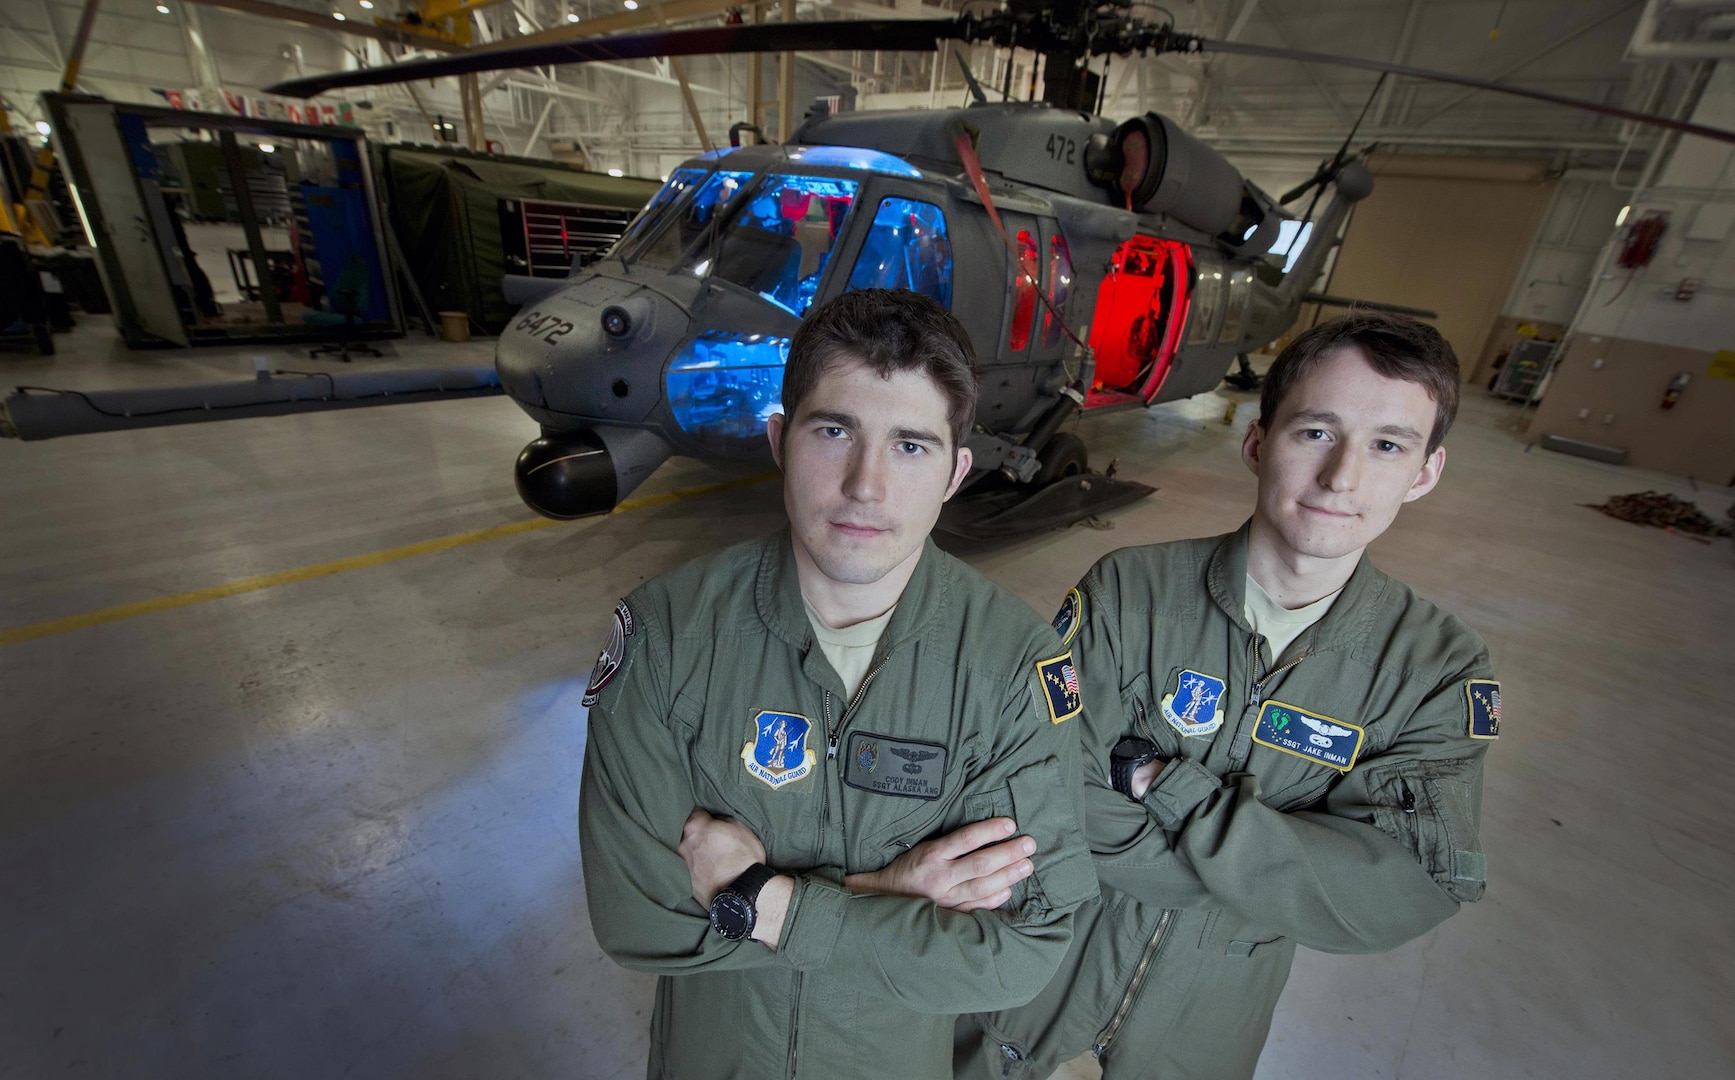 Air Force Staff Sgt. Cody Inman, a pararescue jumper assigned to the 210th Rescue Squadron, Alaska Air National Guard, left and his brother Air Force Staff Sgt. Jacob Inman, a special mission aviator assigned to the 212th Rescue Squadron, Alaska Air National Guard, stand in front of a HH-60 Pave Hawk helicopter on Joint Base Elmendorf-Richardson, Alaska, Nov. 20, 2013.